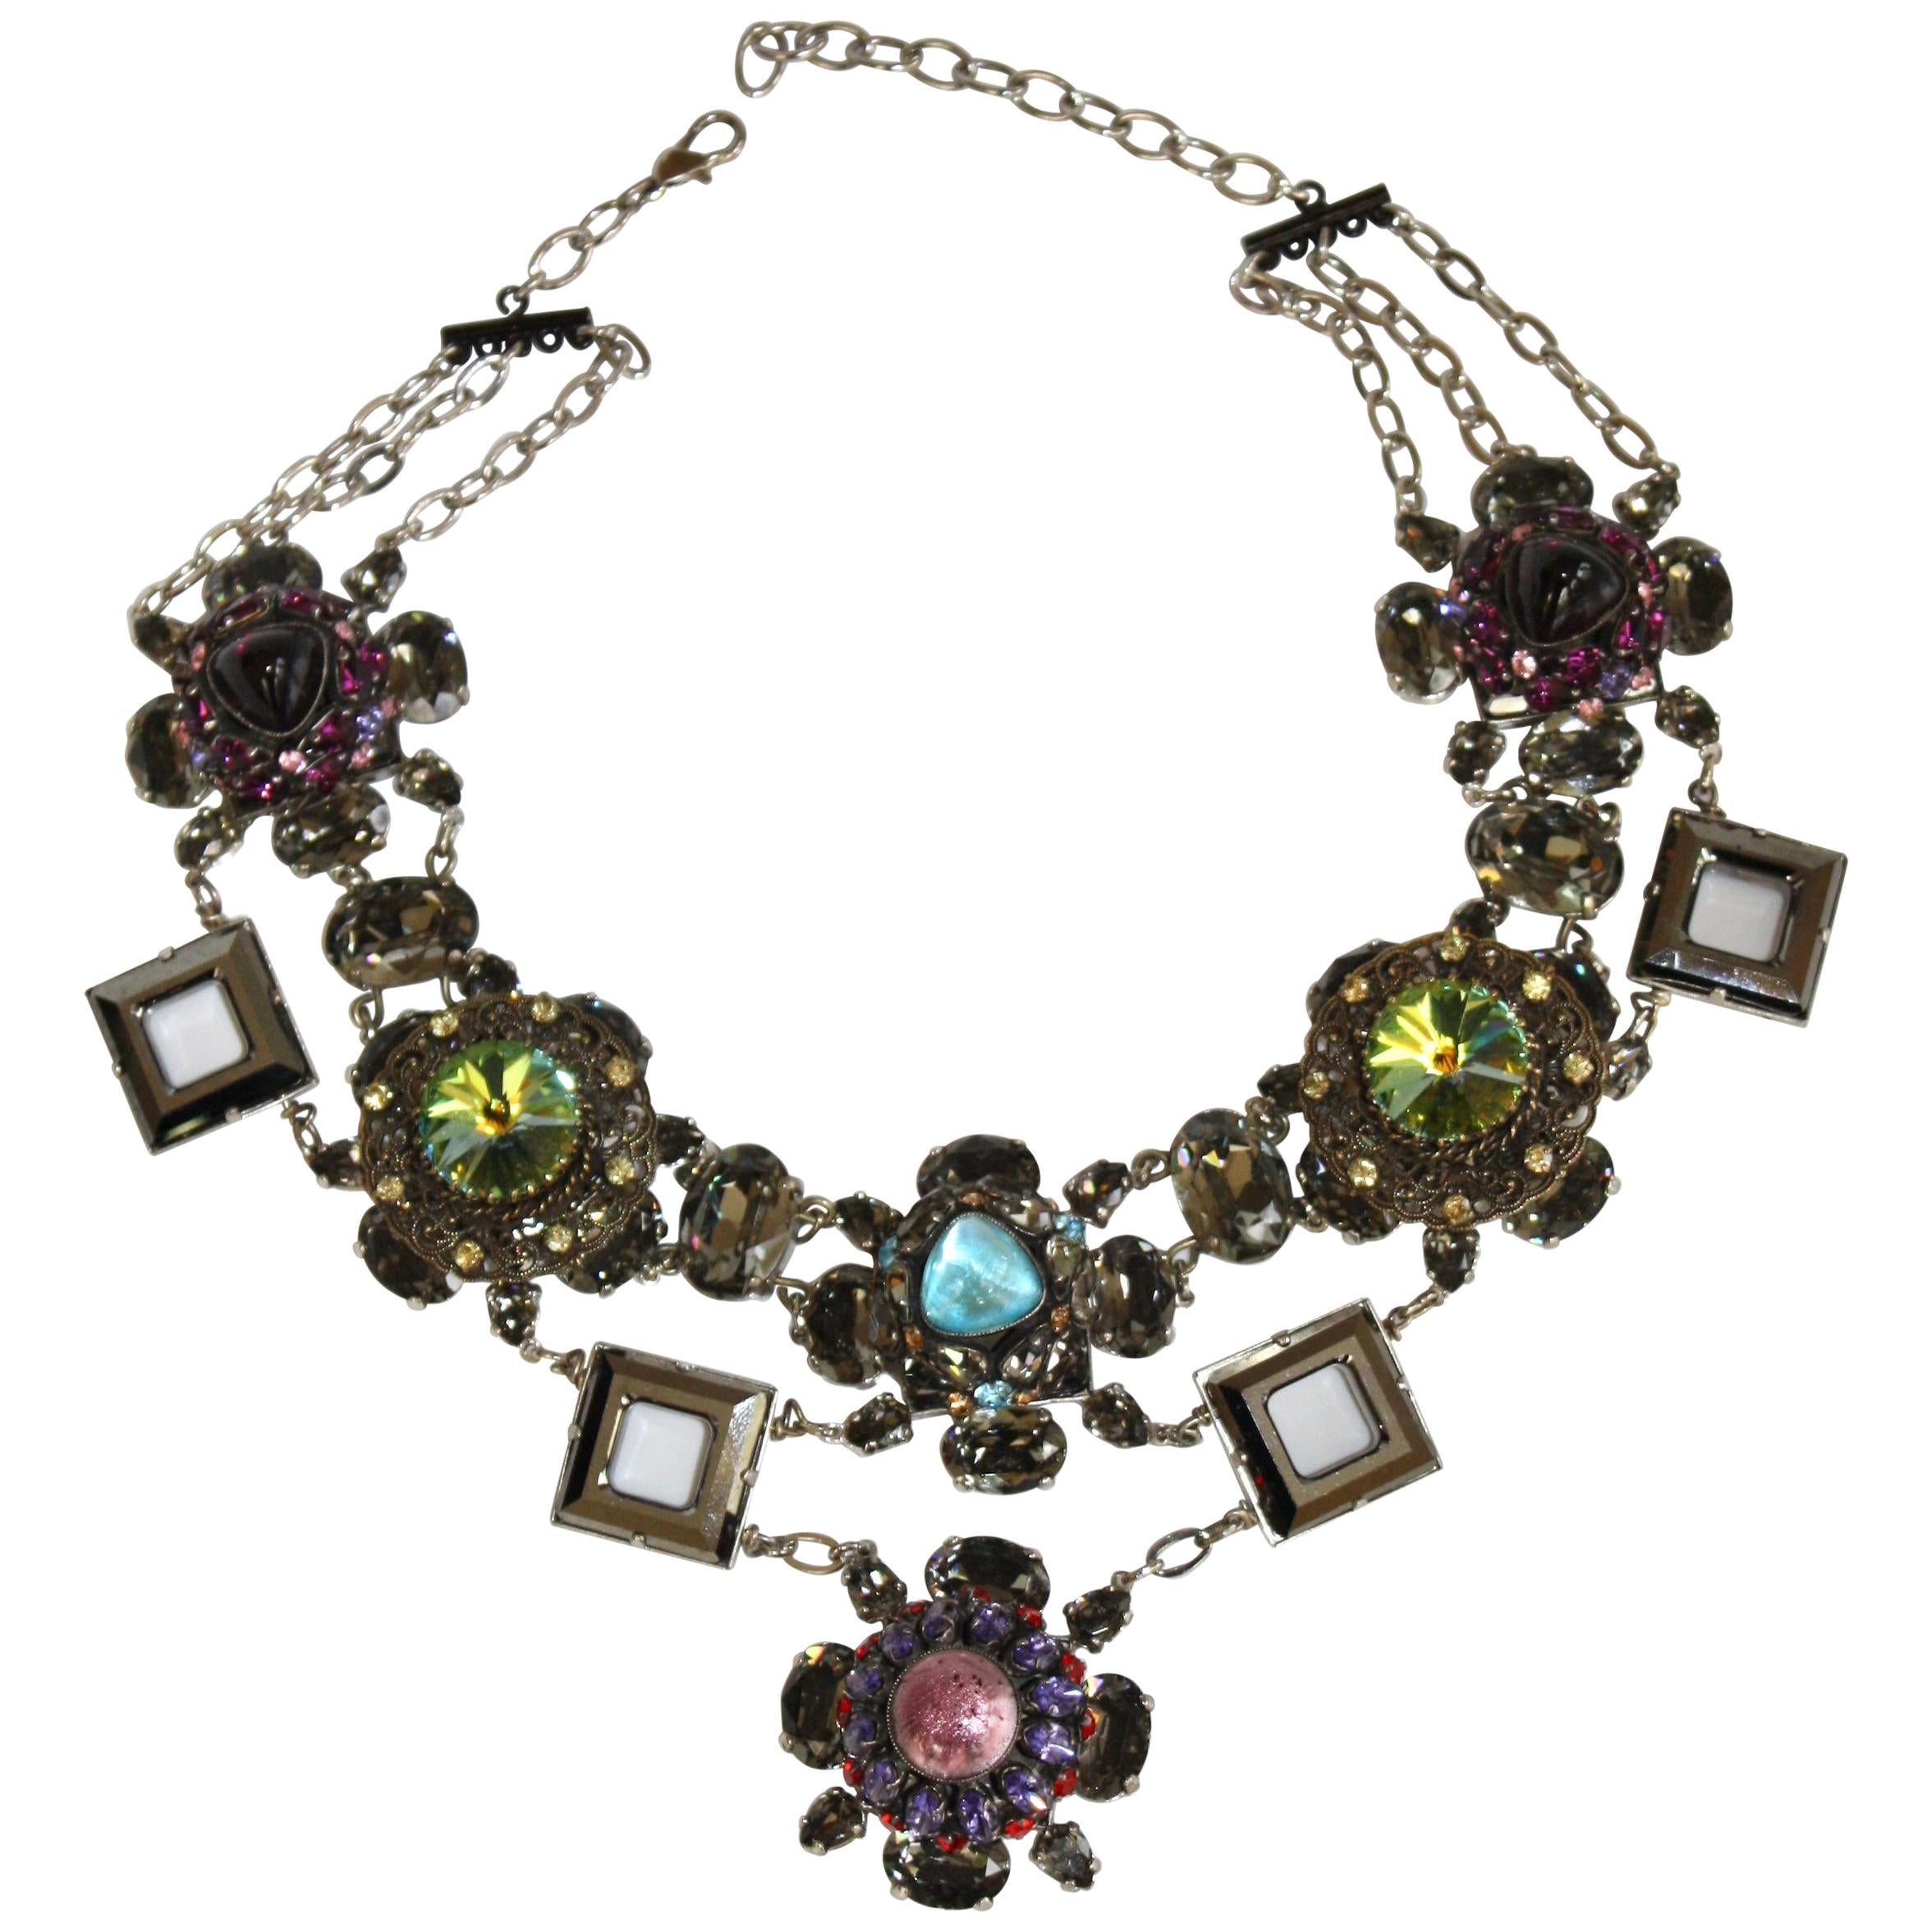 Francoise Montague Vintage Glass and Crystal Limited Series Necklace